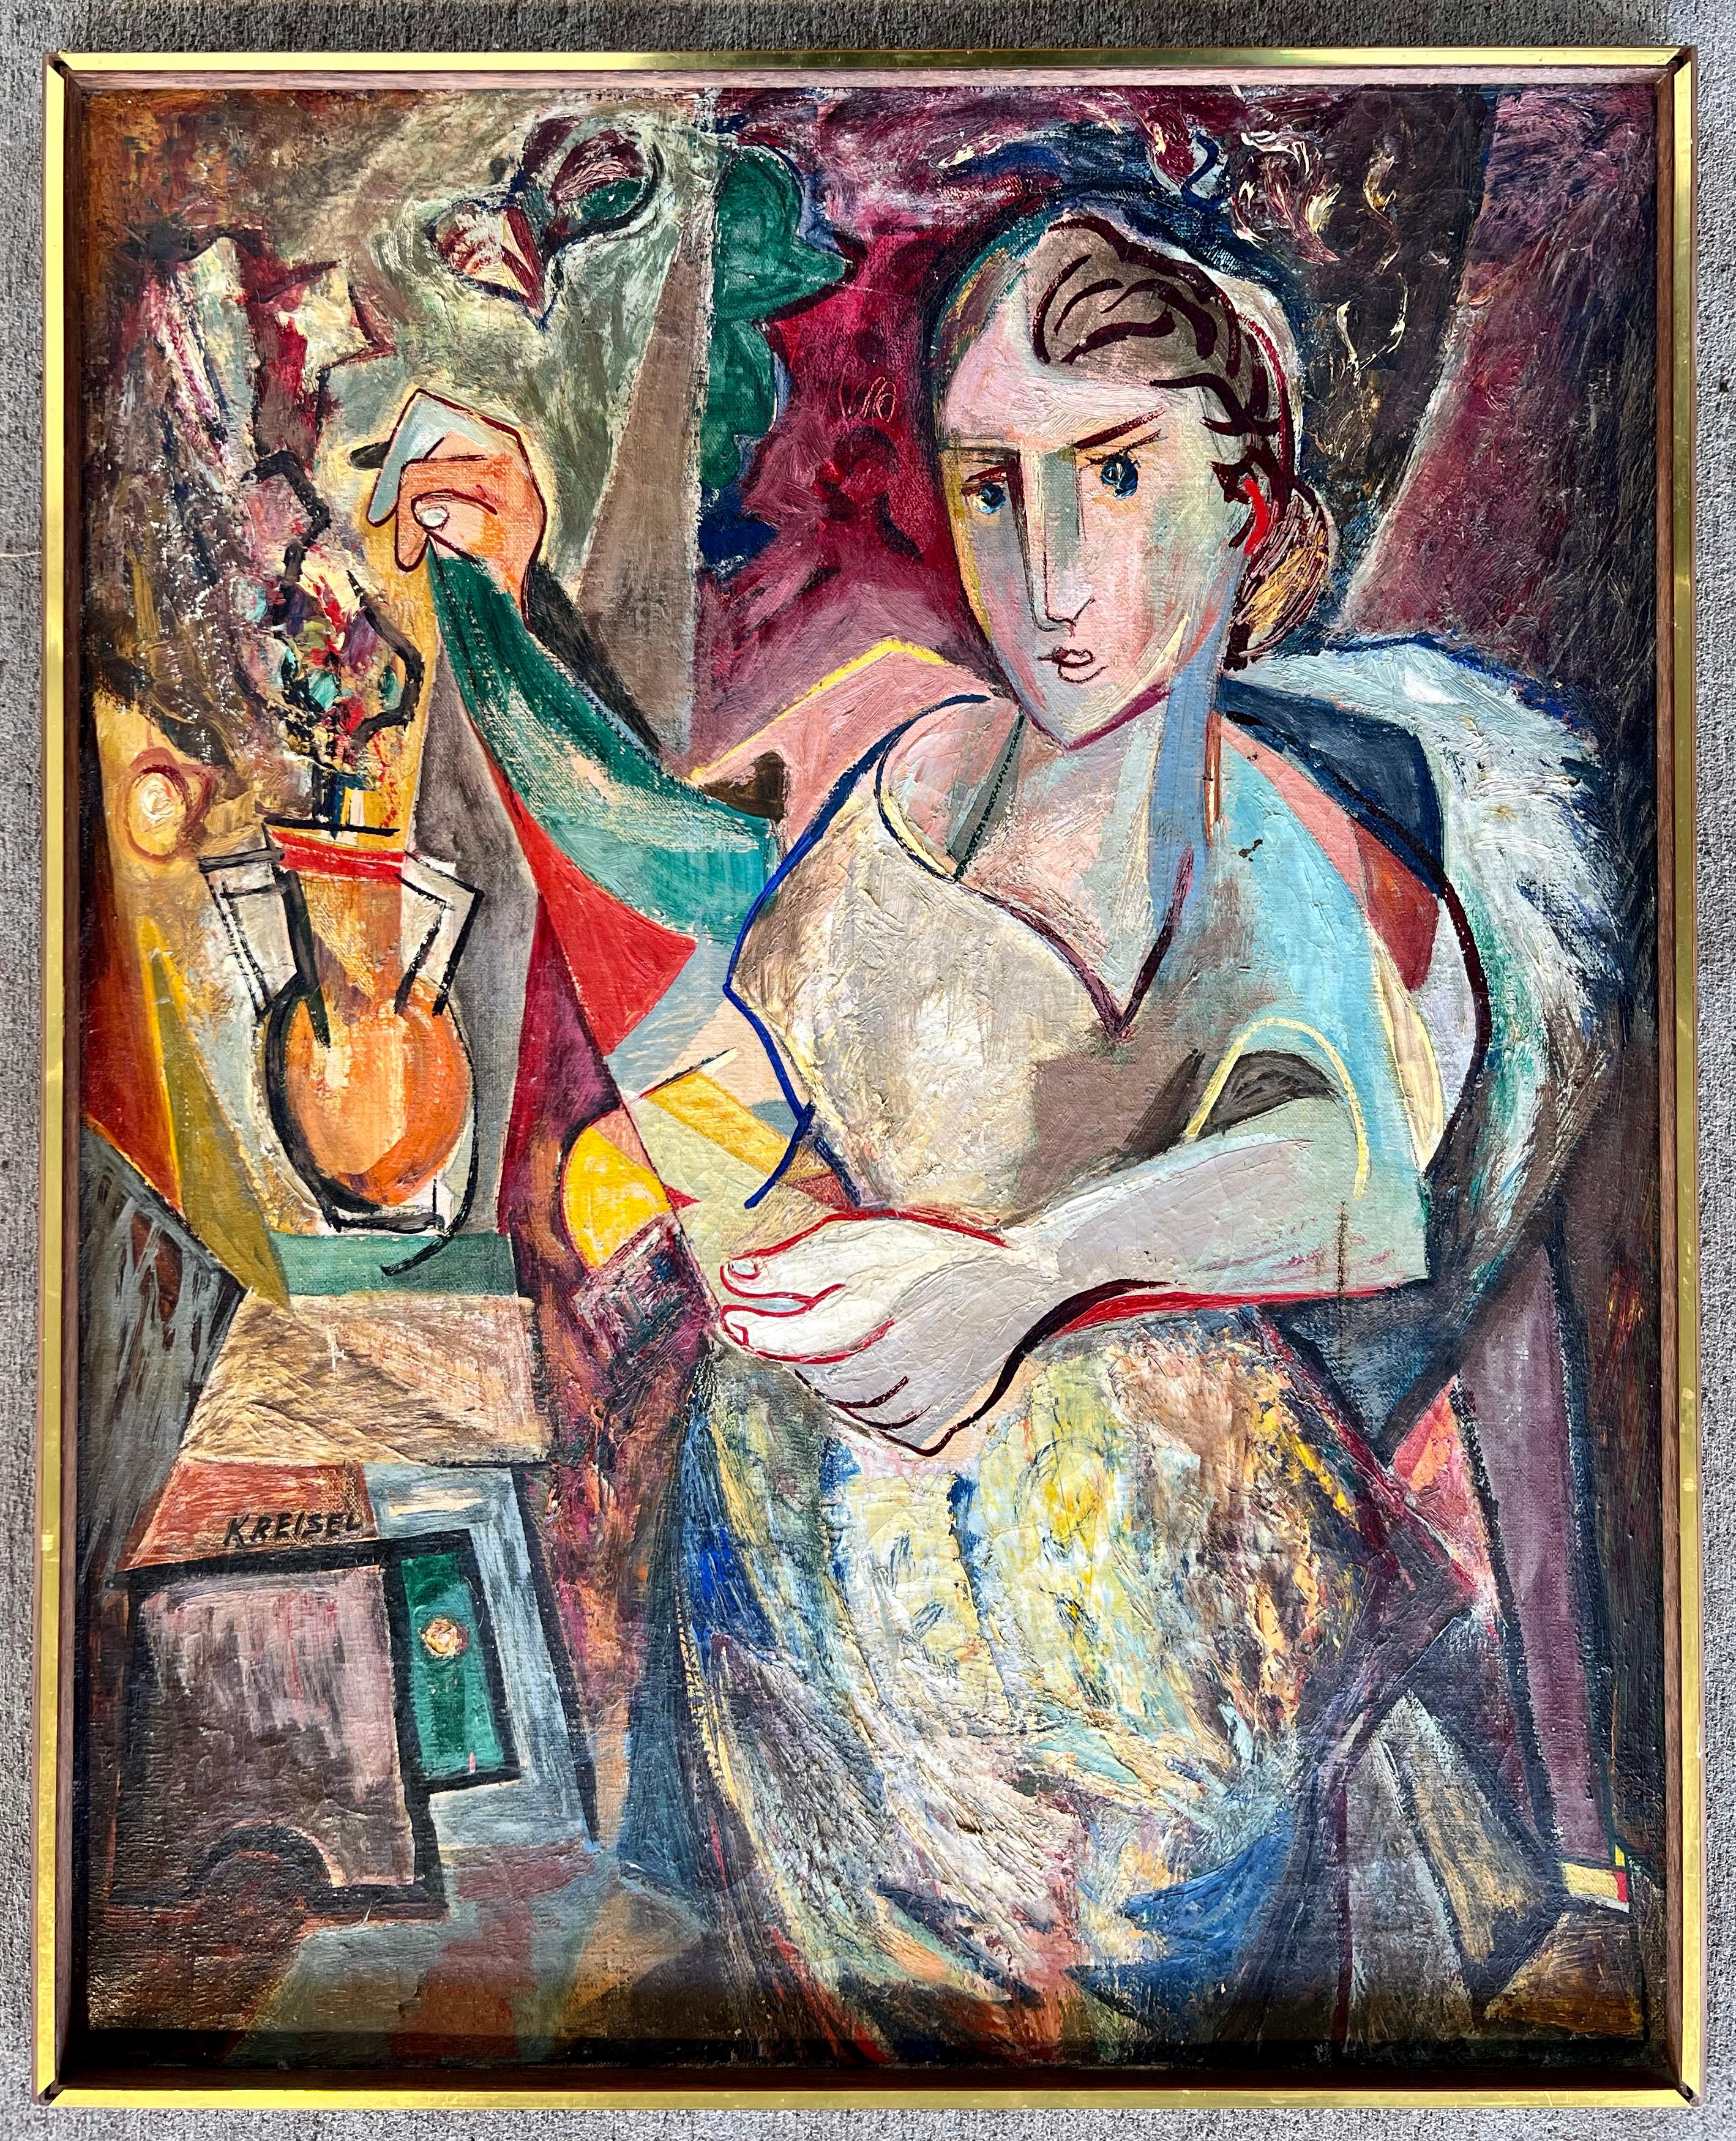 Lady with Scarf - Painting by Alexander Kreisel